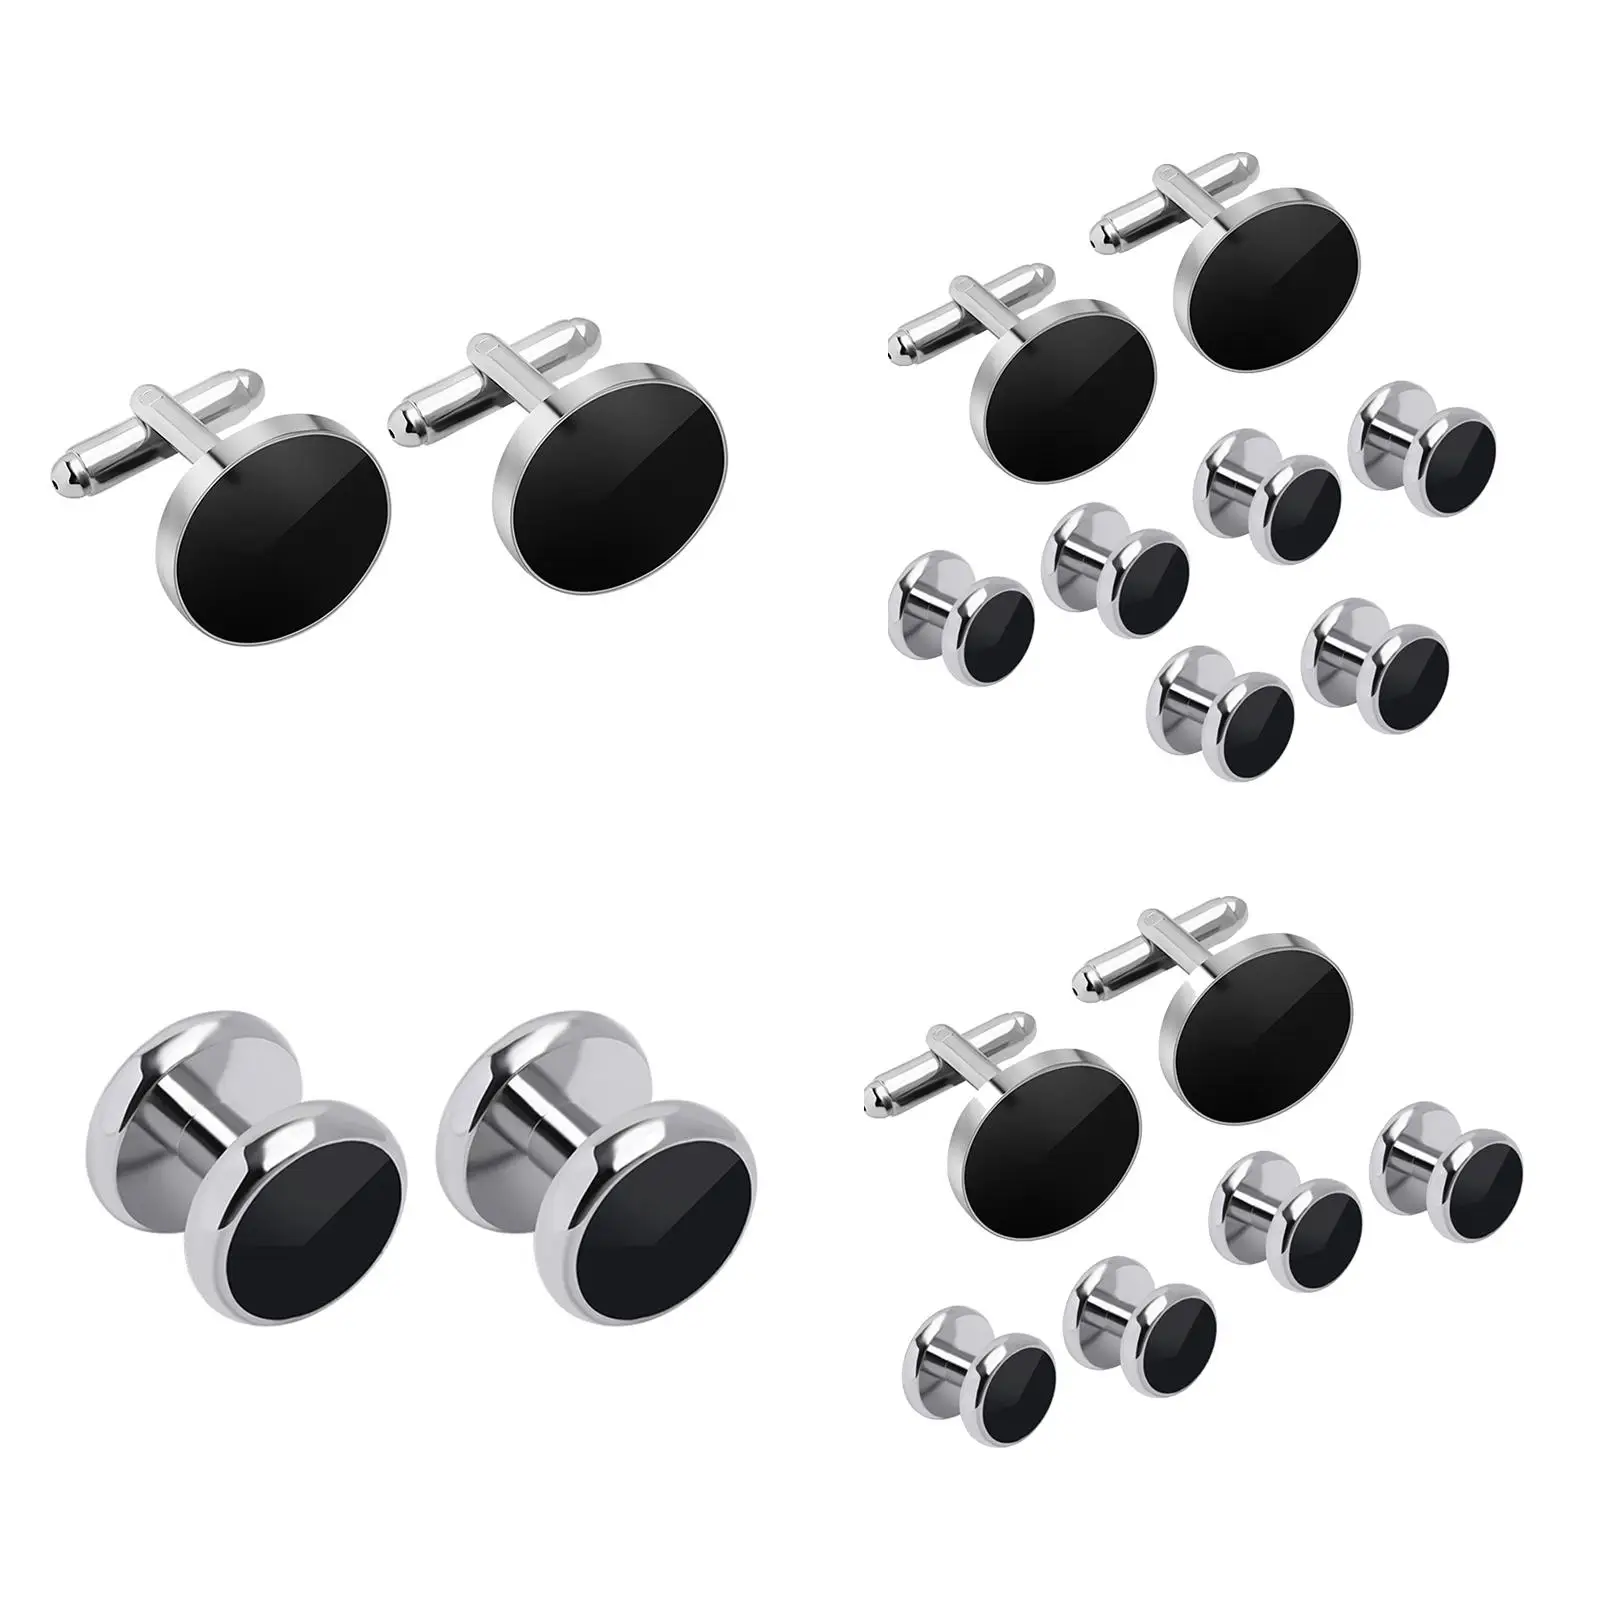 Cufflinks and Studs Set, Customed Formal Solid Unique Jewelry,  Links Kit for Tuxedo Puit Shirts Party Business Wedding